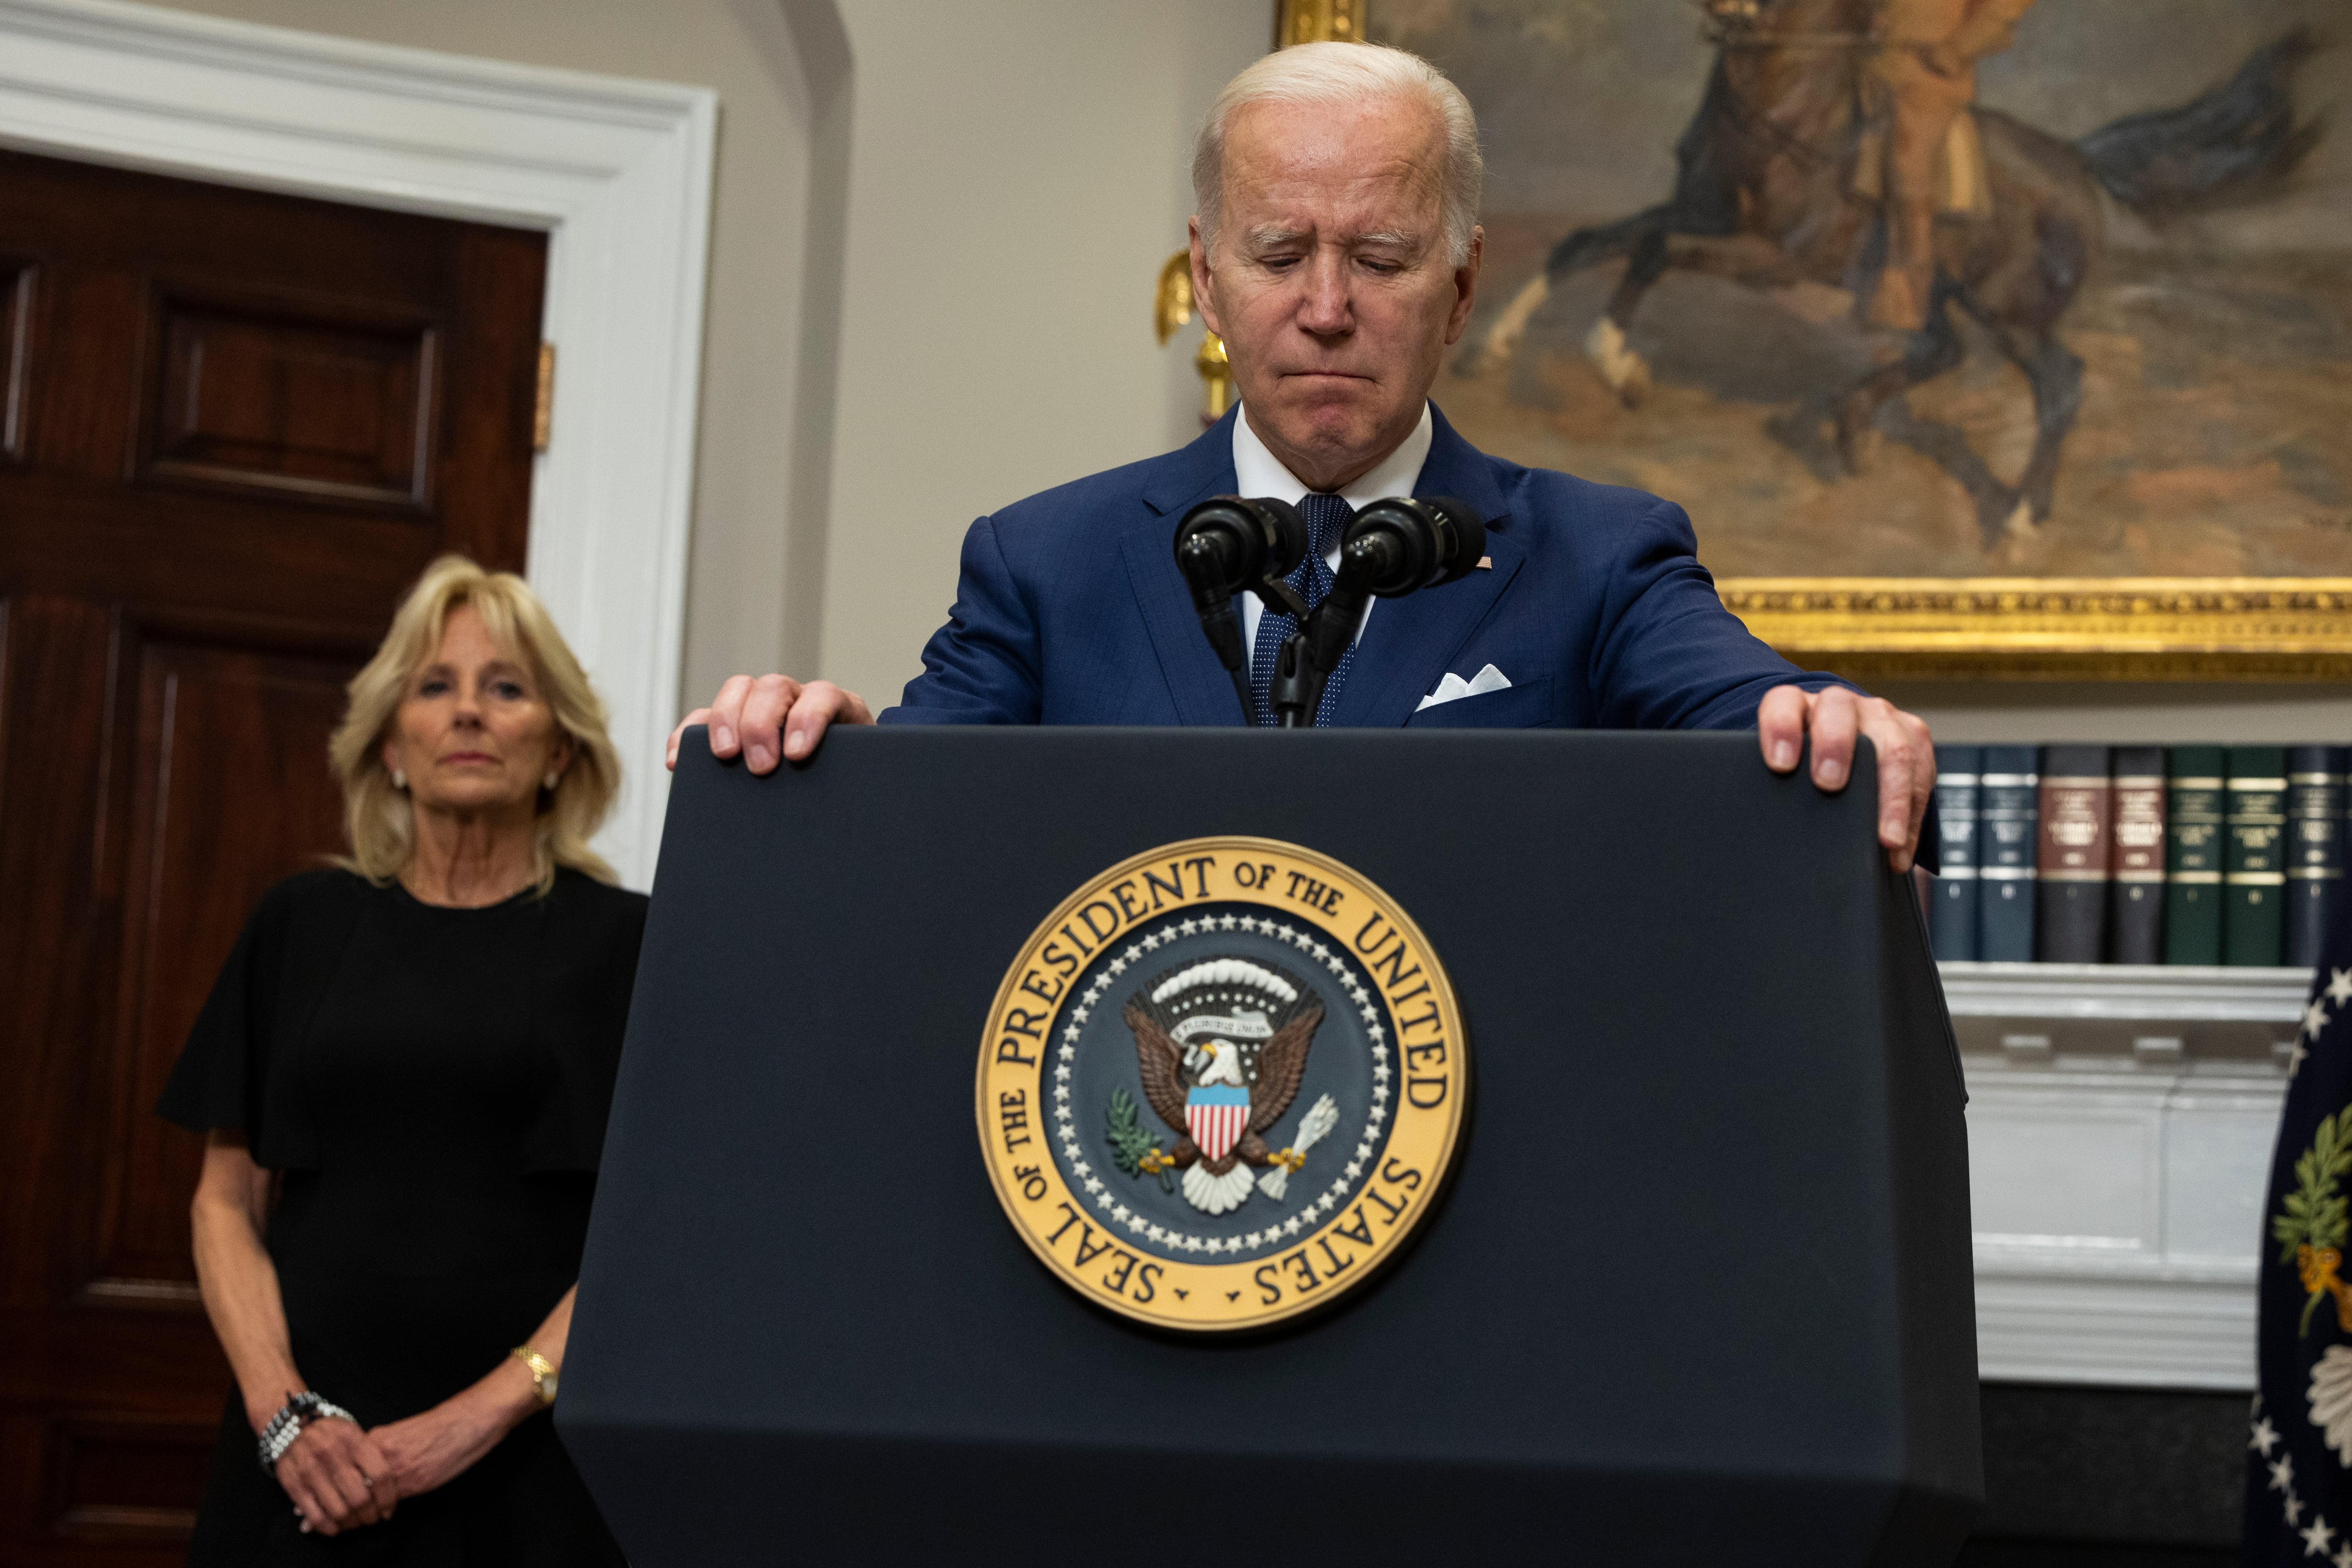 President Joe Biden clutches a podium during a speech to the nation, his wife Dr. Jill Biden stands behind his right shoulder.